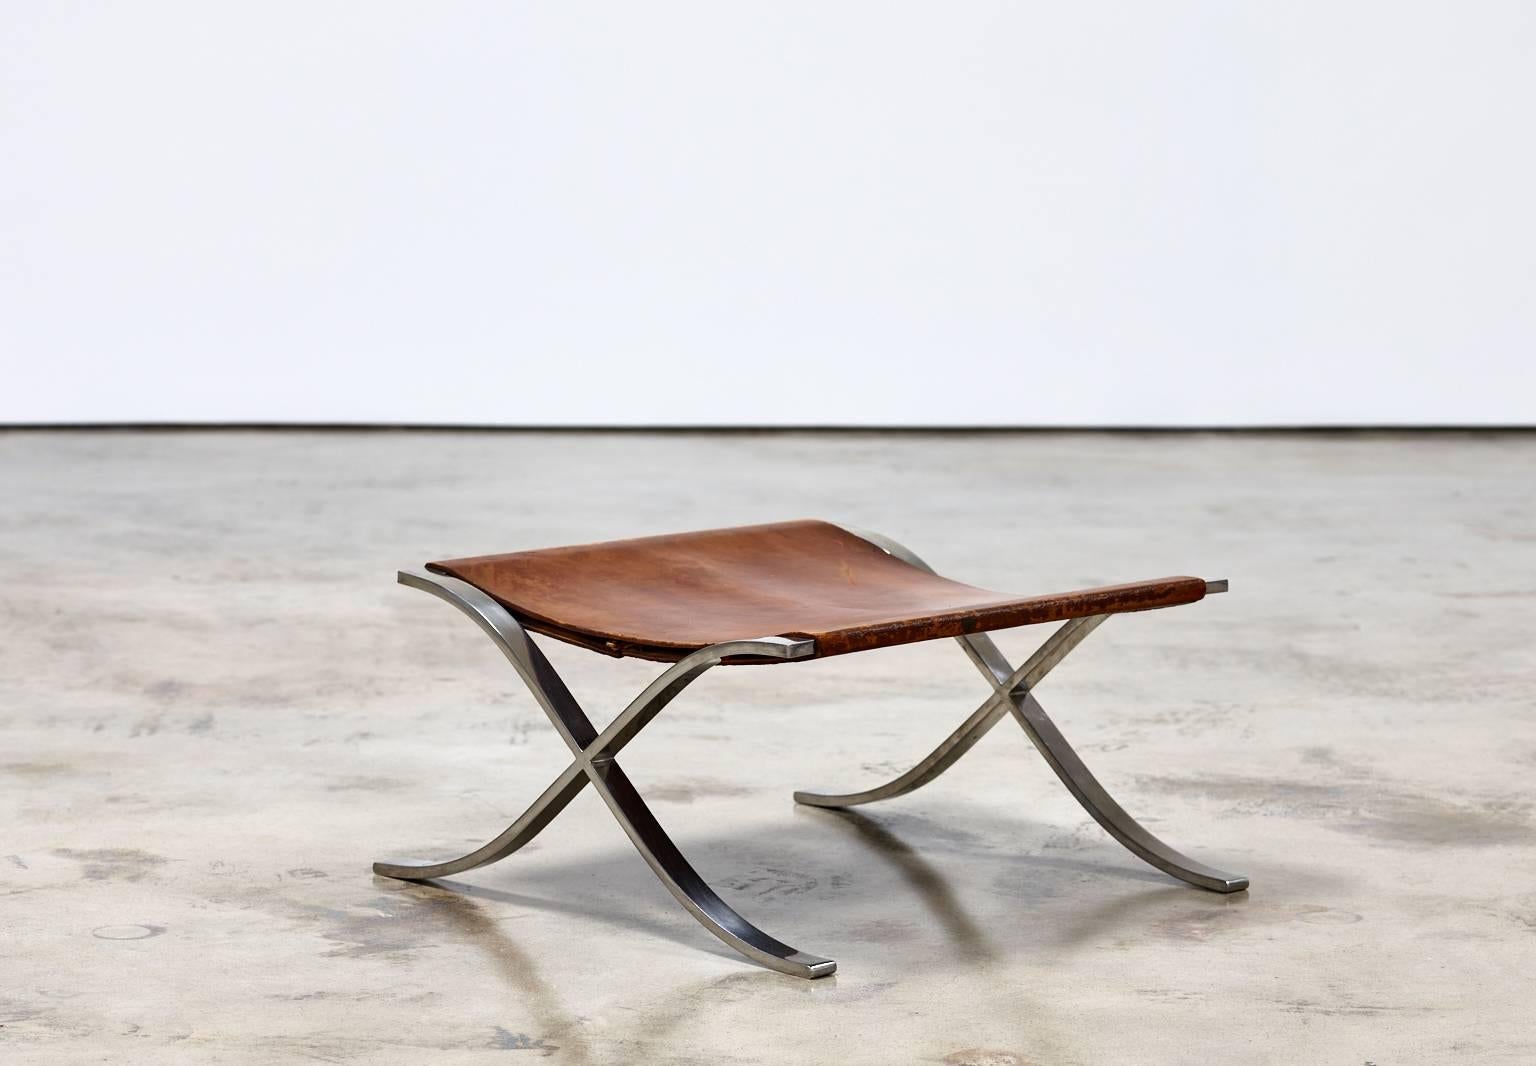 Barcelona stool by Ludwig Mies van der Rohe for Knoll,

USA, circa 1960s.

Stainless steel, original cognac leather.

Measures: 12 in. H x 23 in. W x 24 in. D.
30 cm H x 58 cm W x 61 cm D.
 